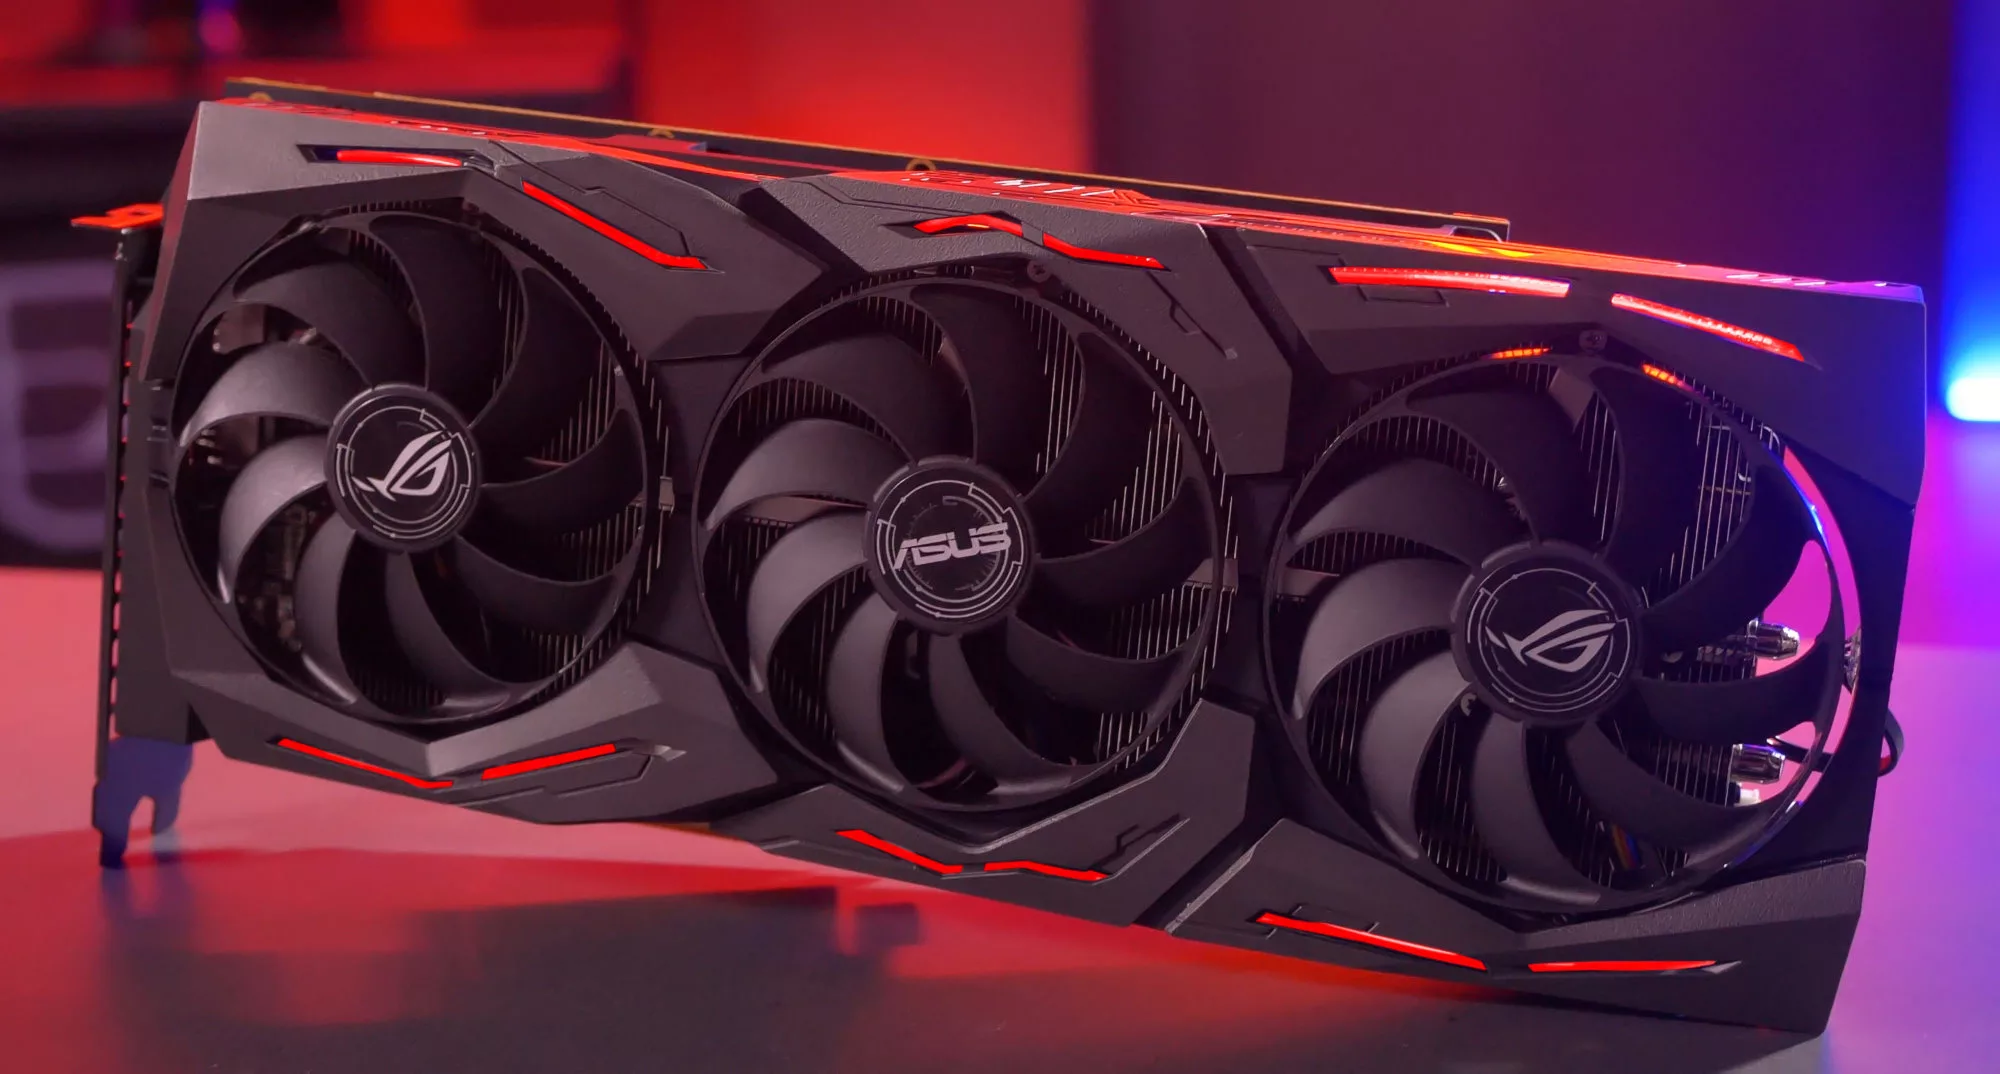 Radeon RX 5700-series graphics cards from ROG and ASUS let Navi 